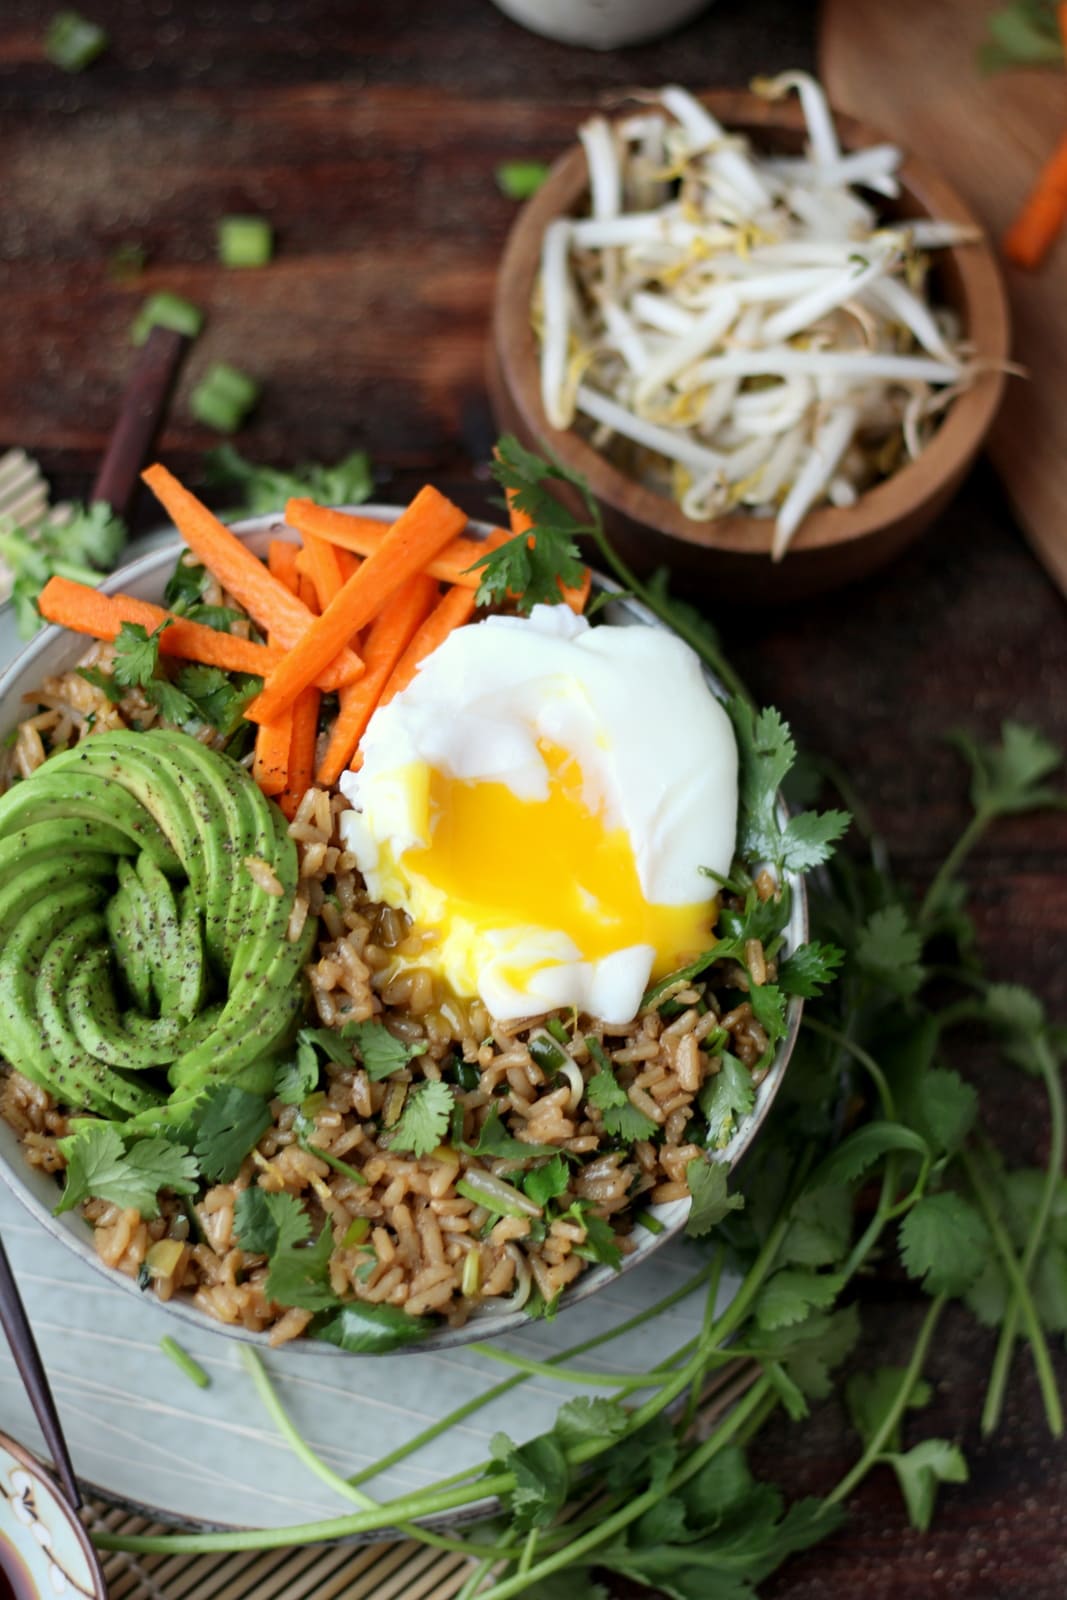 Cilantro Fried Rice + Avocado and Poached Egg - awesome vegetarian rice bowl recipe! thewoodenskillet.com #recipe #foodphotography